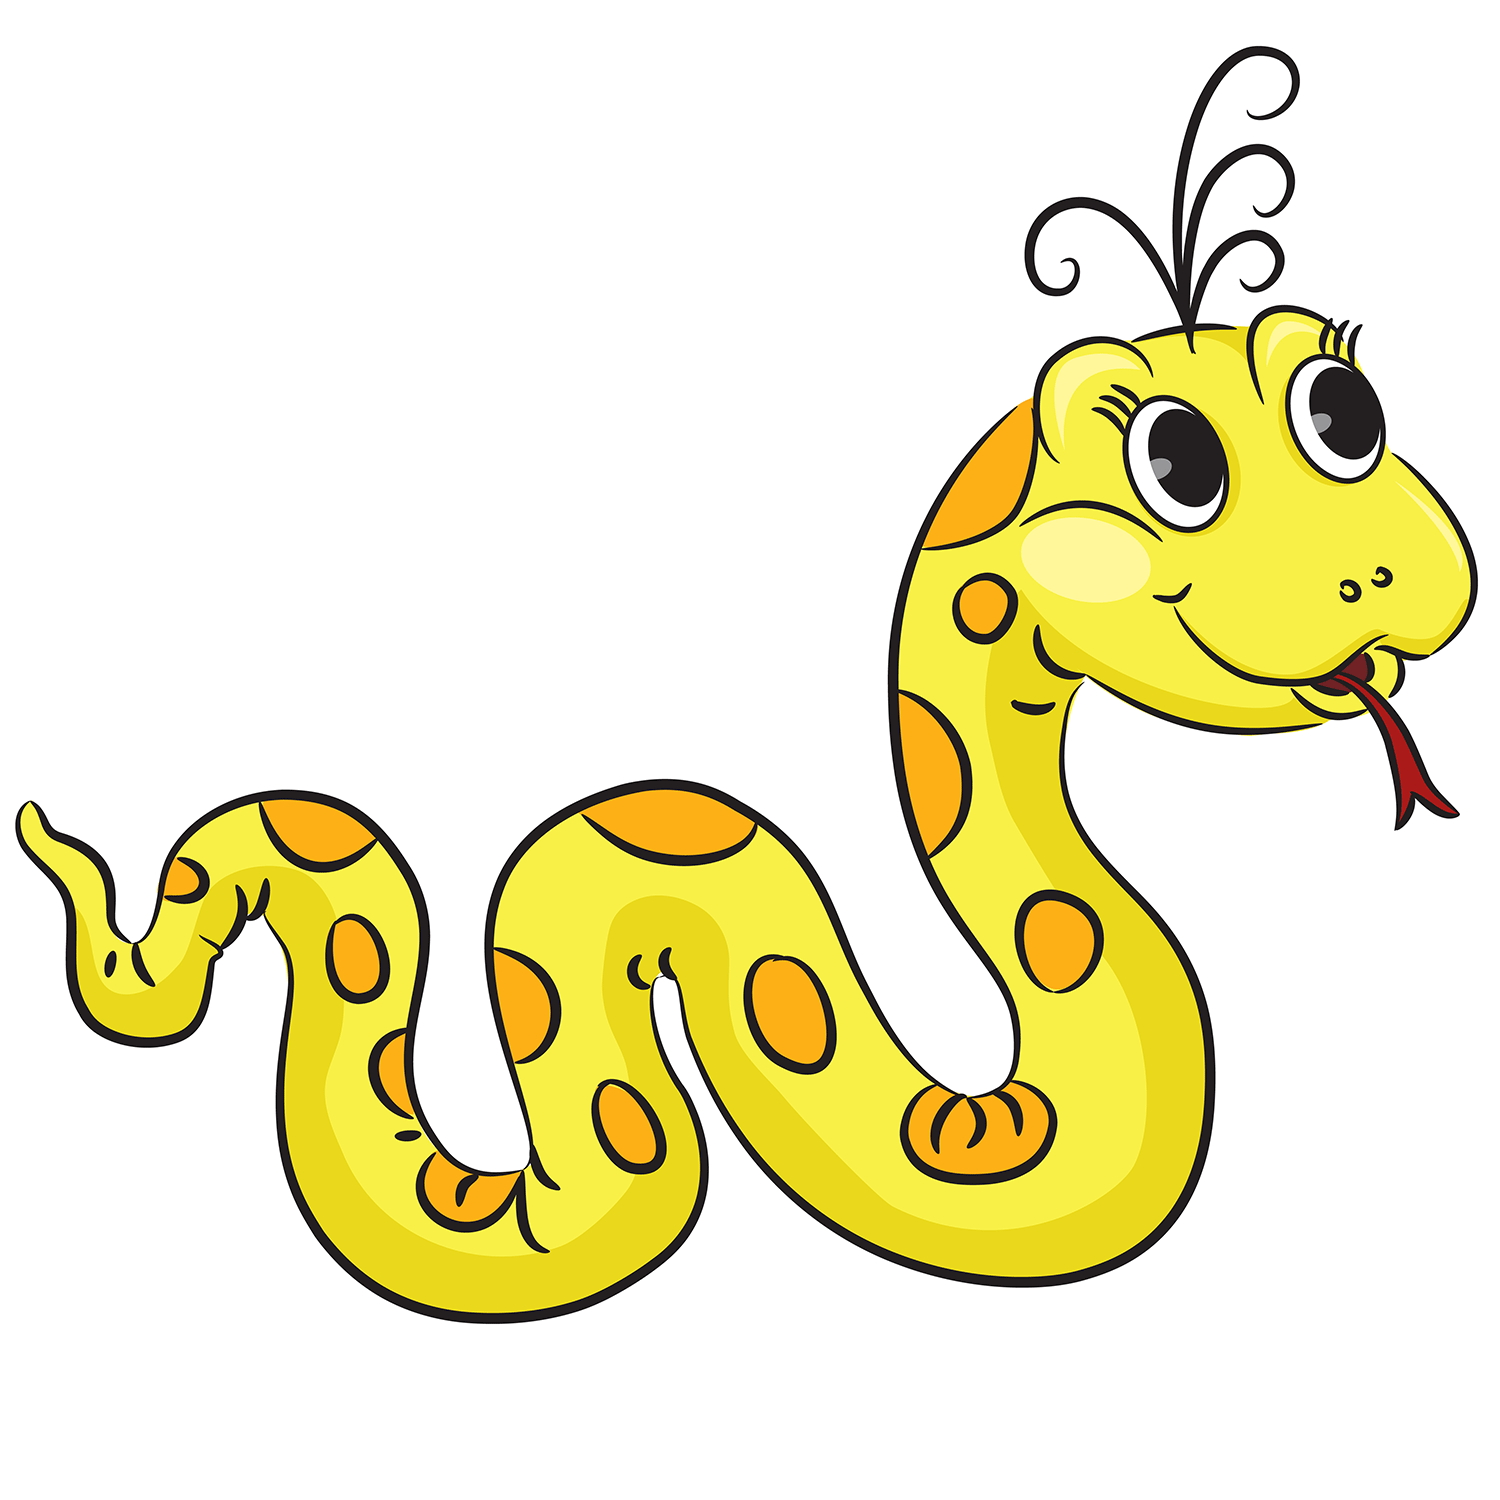 Cartoon Pictures Of Snakes | WallpaperPool